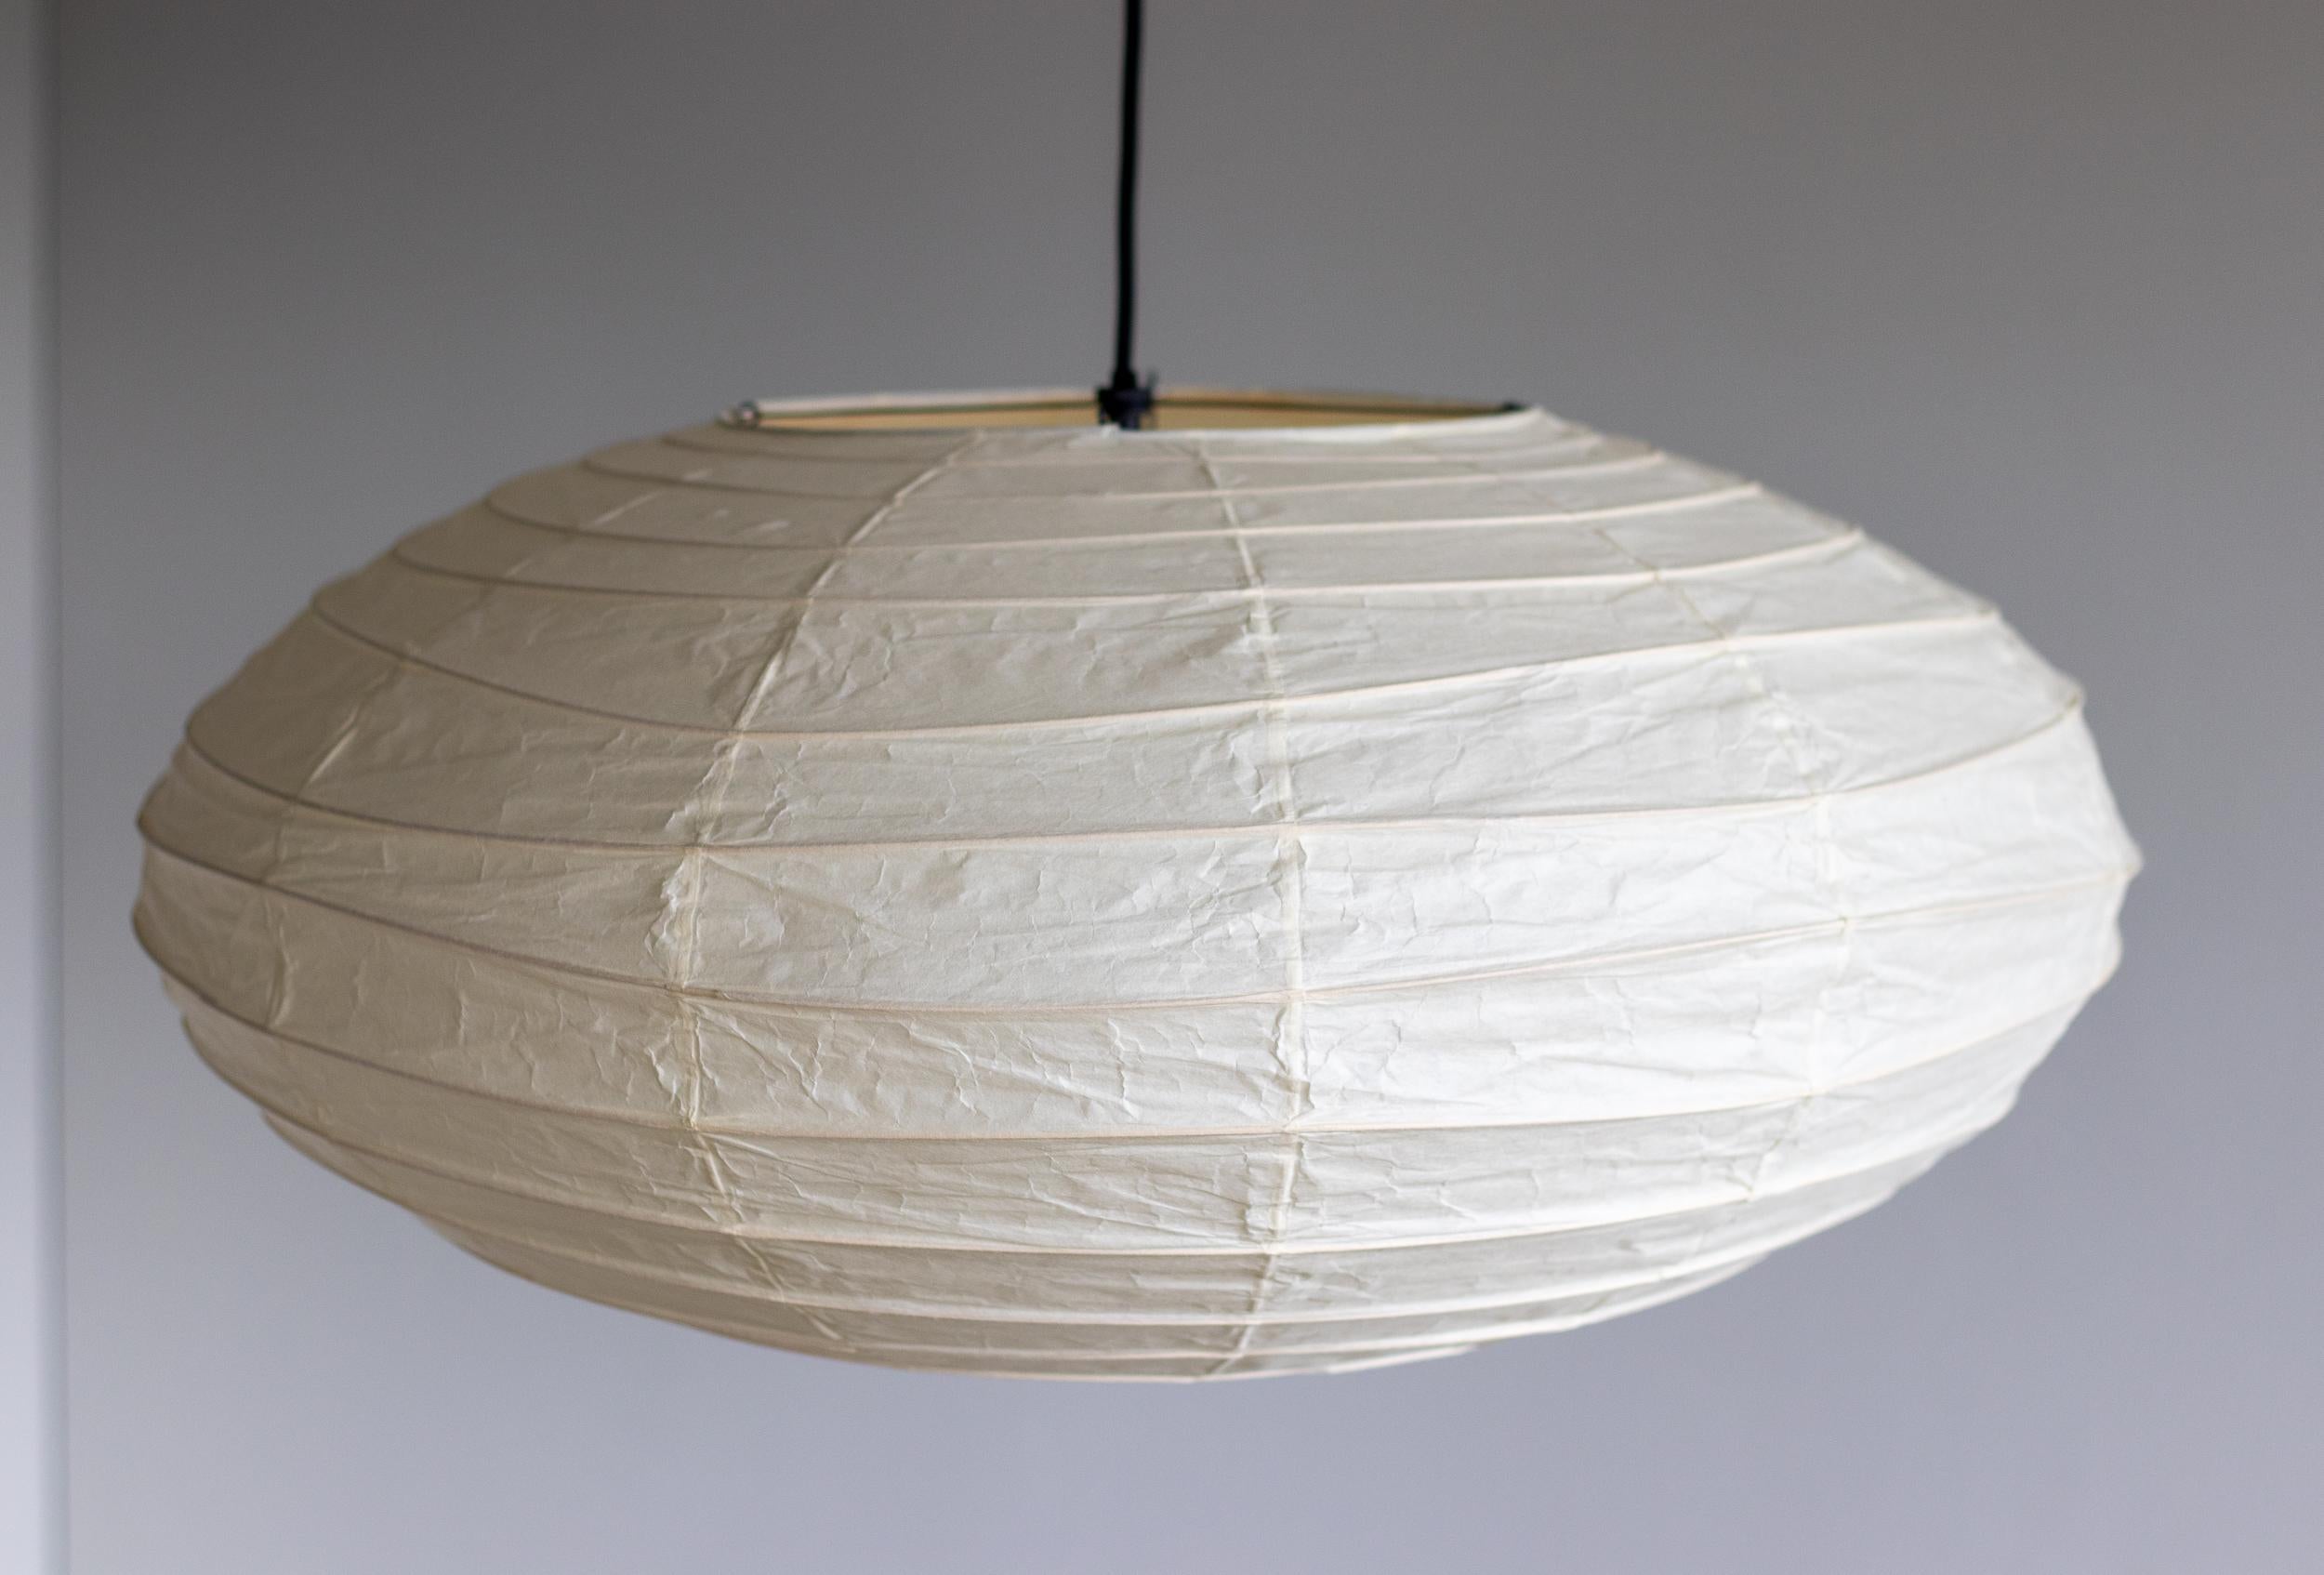 Akari 70N lamp designed by Isamu Noguchi, 1951. Manufactured by Ozeki & Co. in Japan. 
Bambu structure covered by washi paper. Wired for U.S. standards. 
New cord and black enameled steel canopy from Noguchi Museum. 
This fixture has one socket.